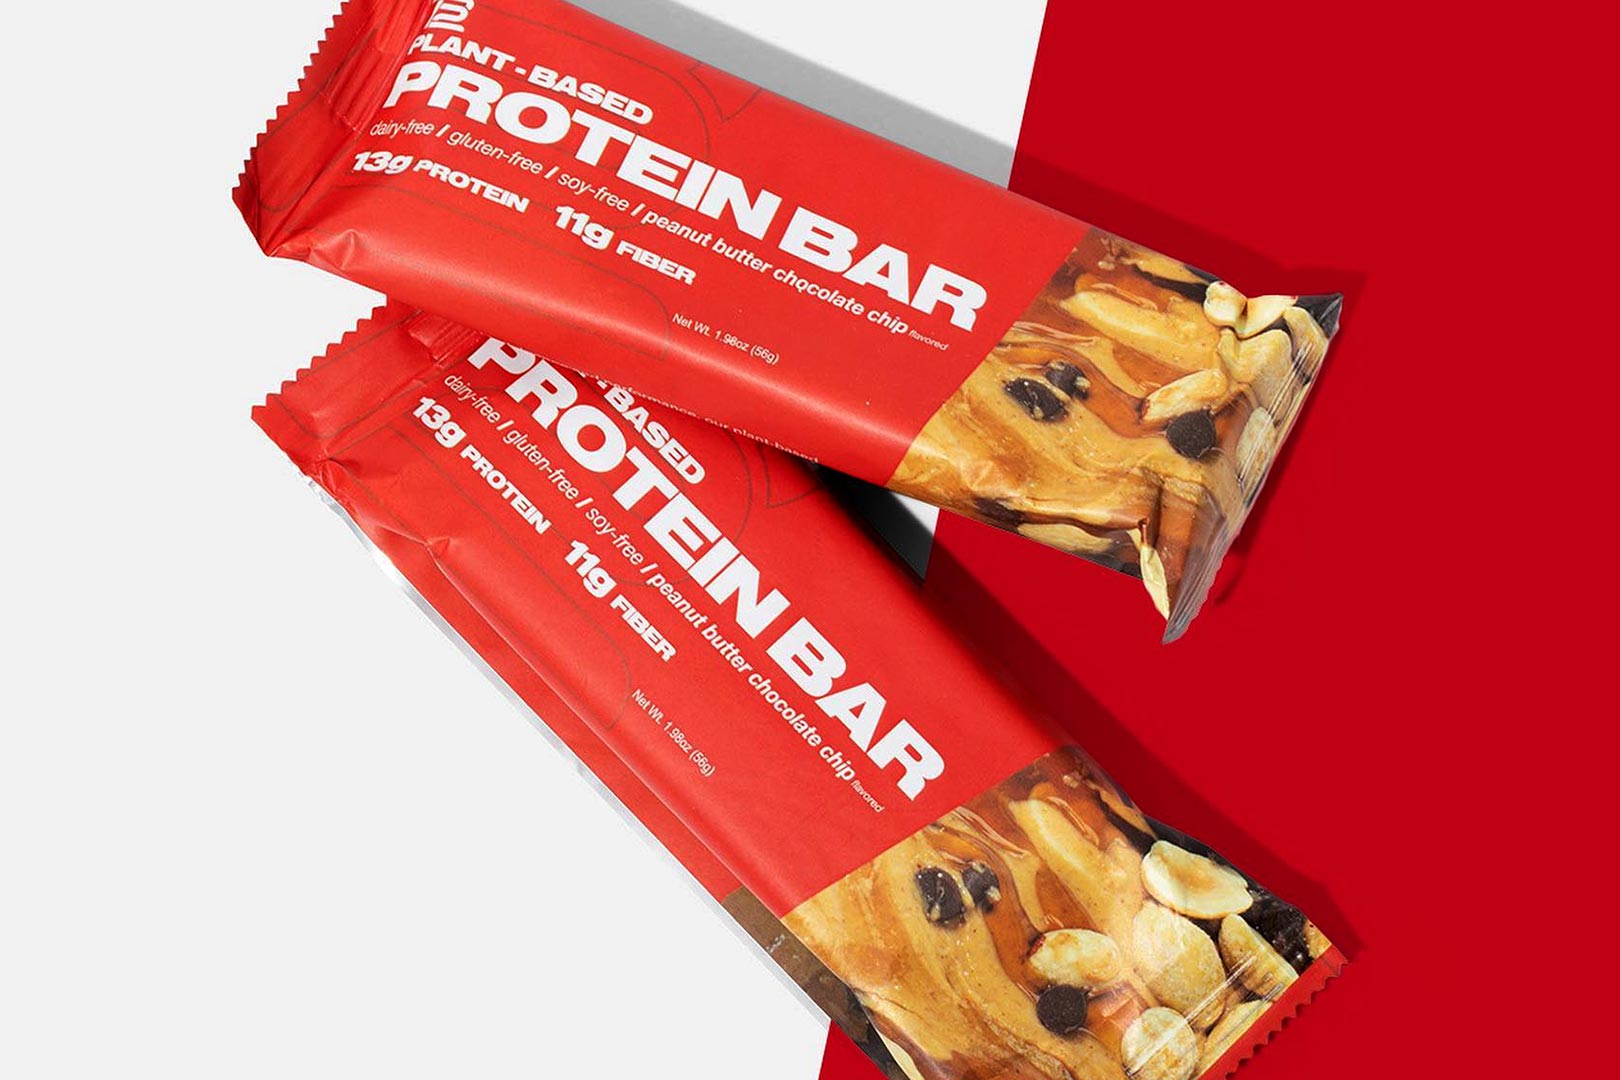 TB12's Peanut Butter Chocolate Chip Plant-Based Protein Bar